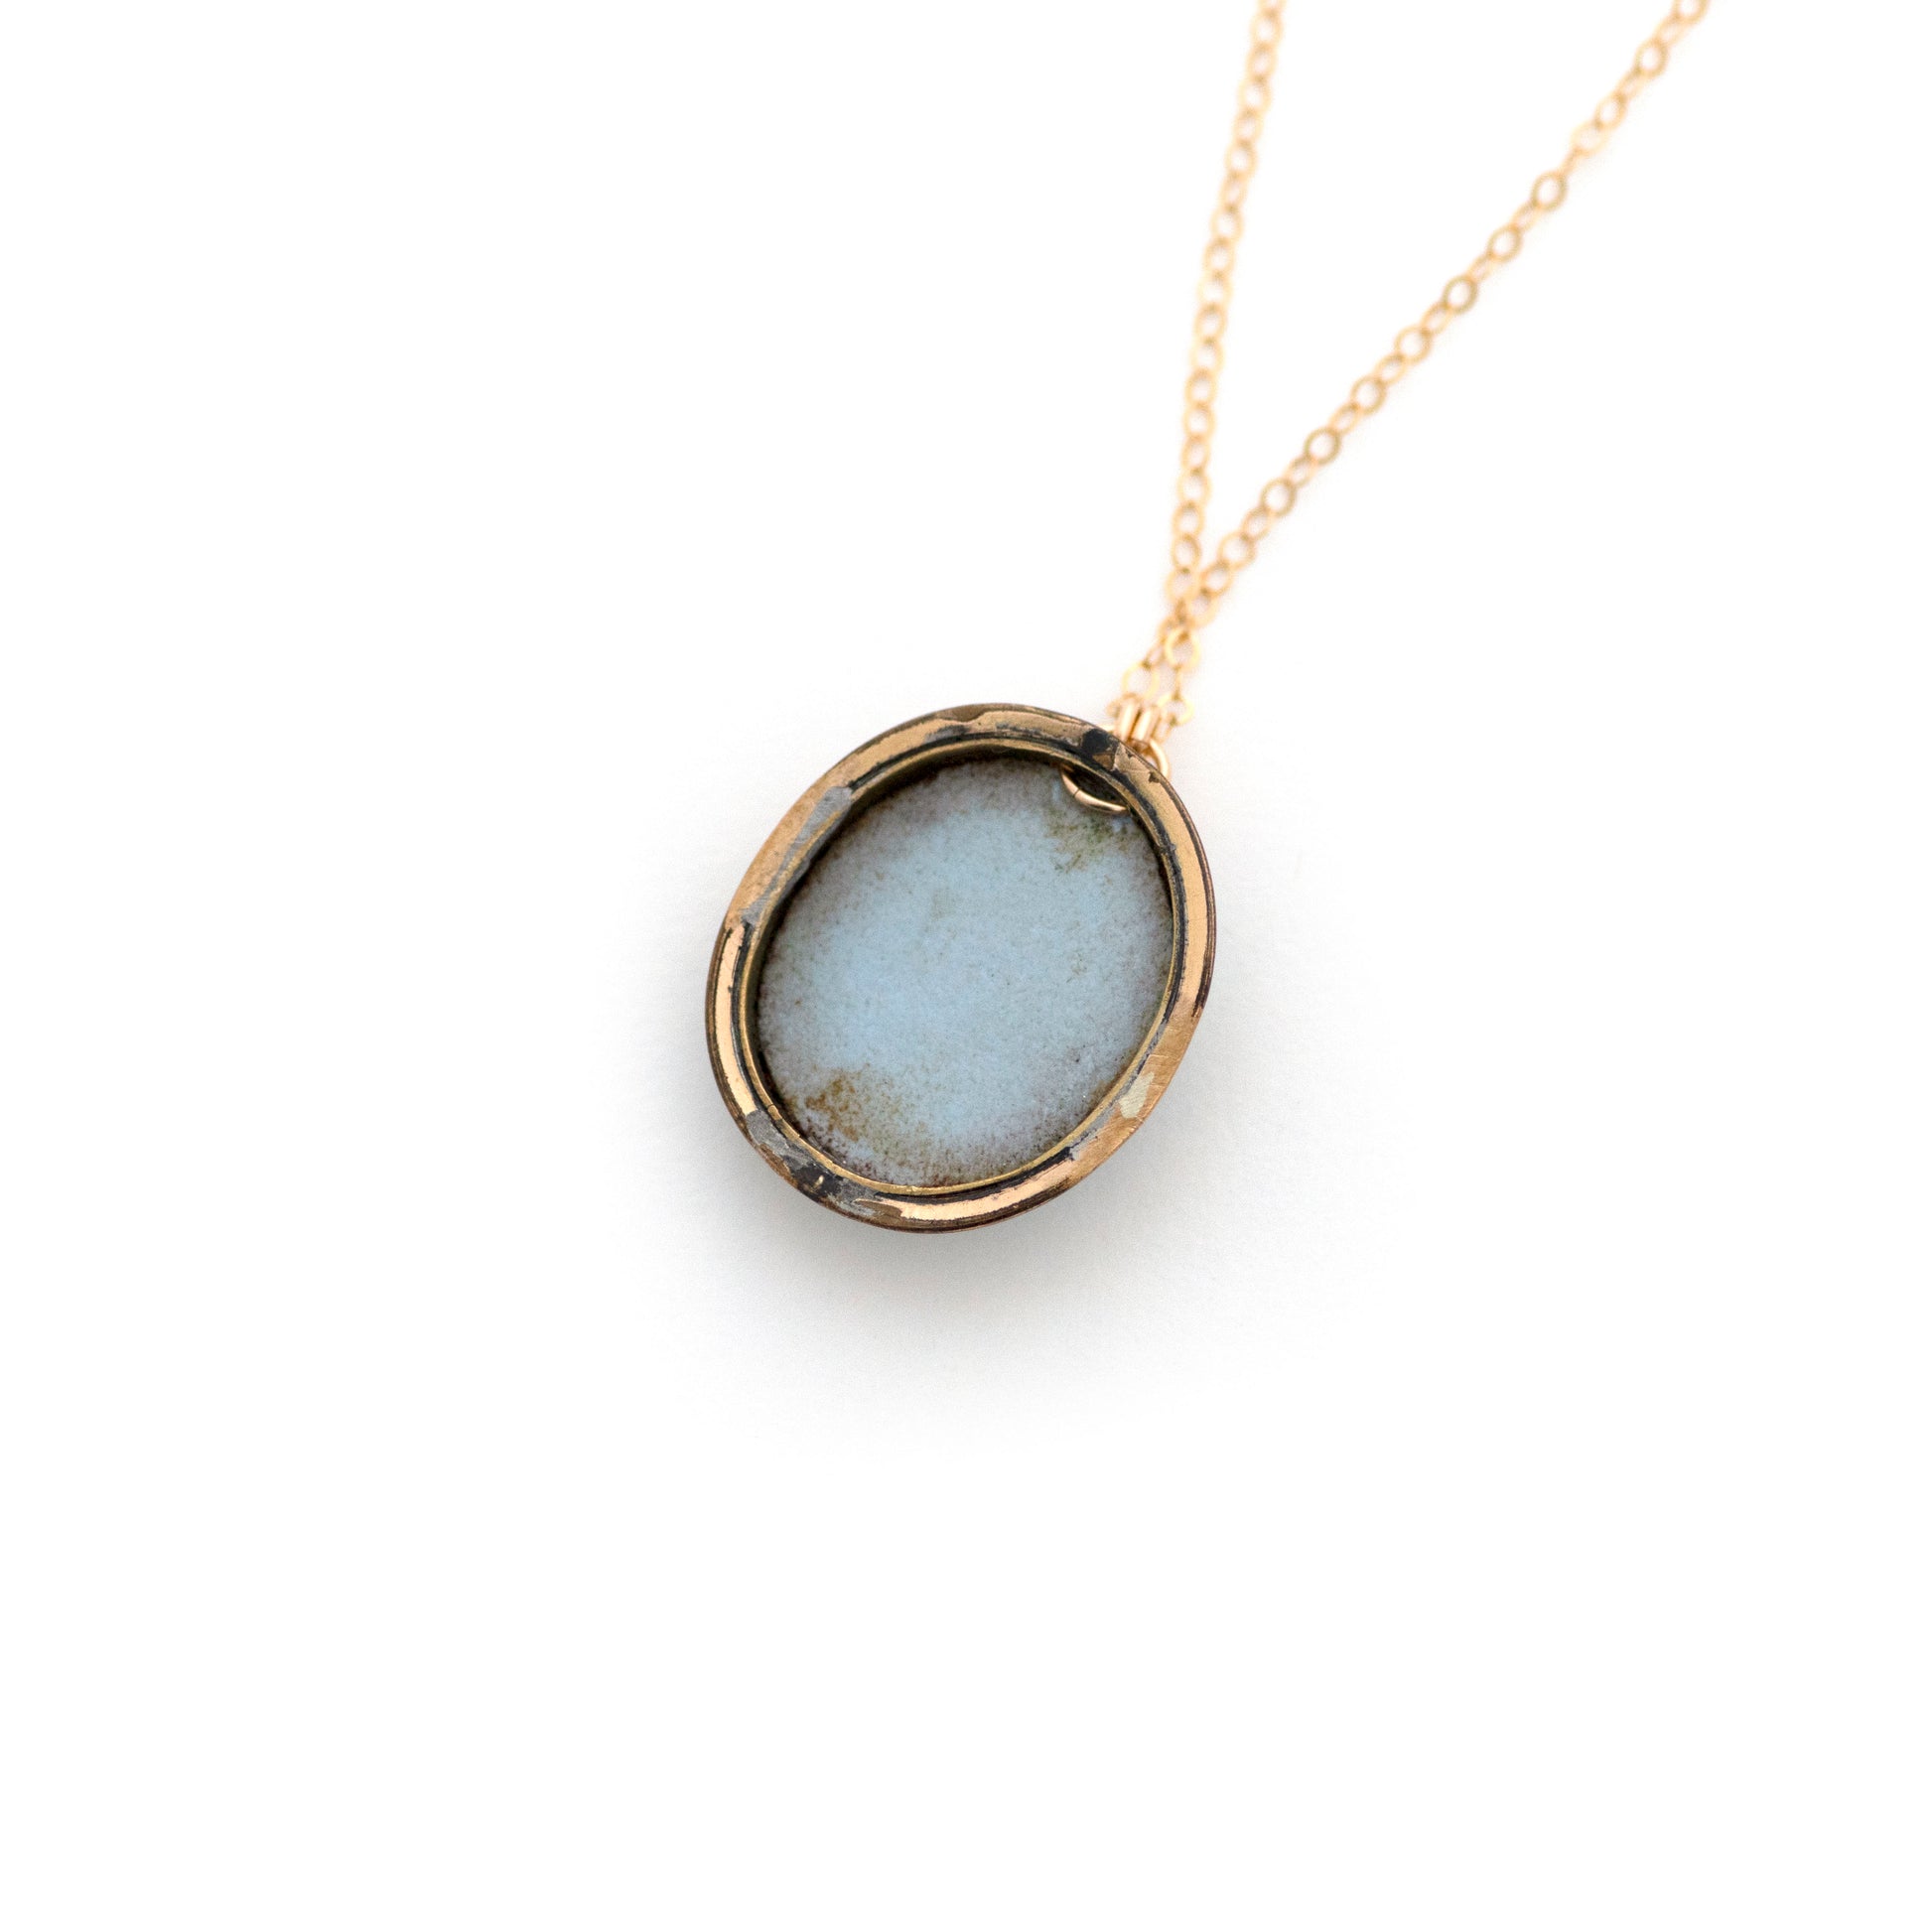 The back of an antique conversion necklace is made up of:  Gold filled Victorian cuff link from the late 1800s with a pale blue porcelain cameo on a 14k gold filled chain.